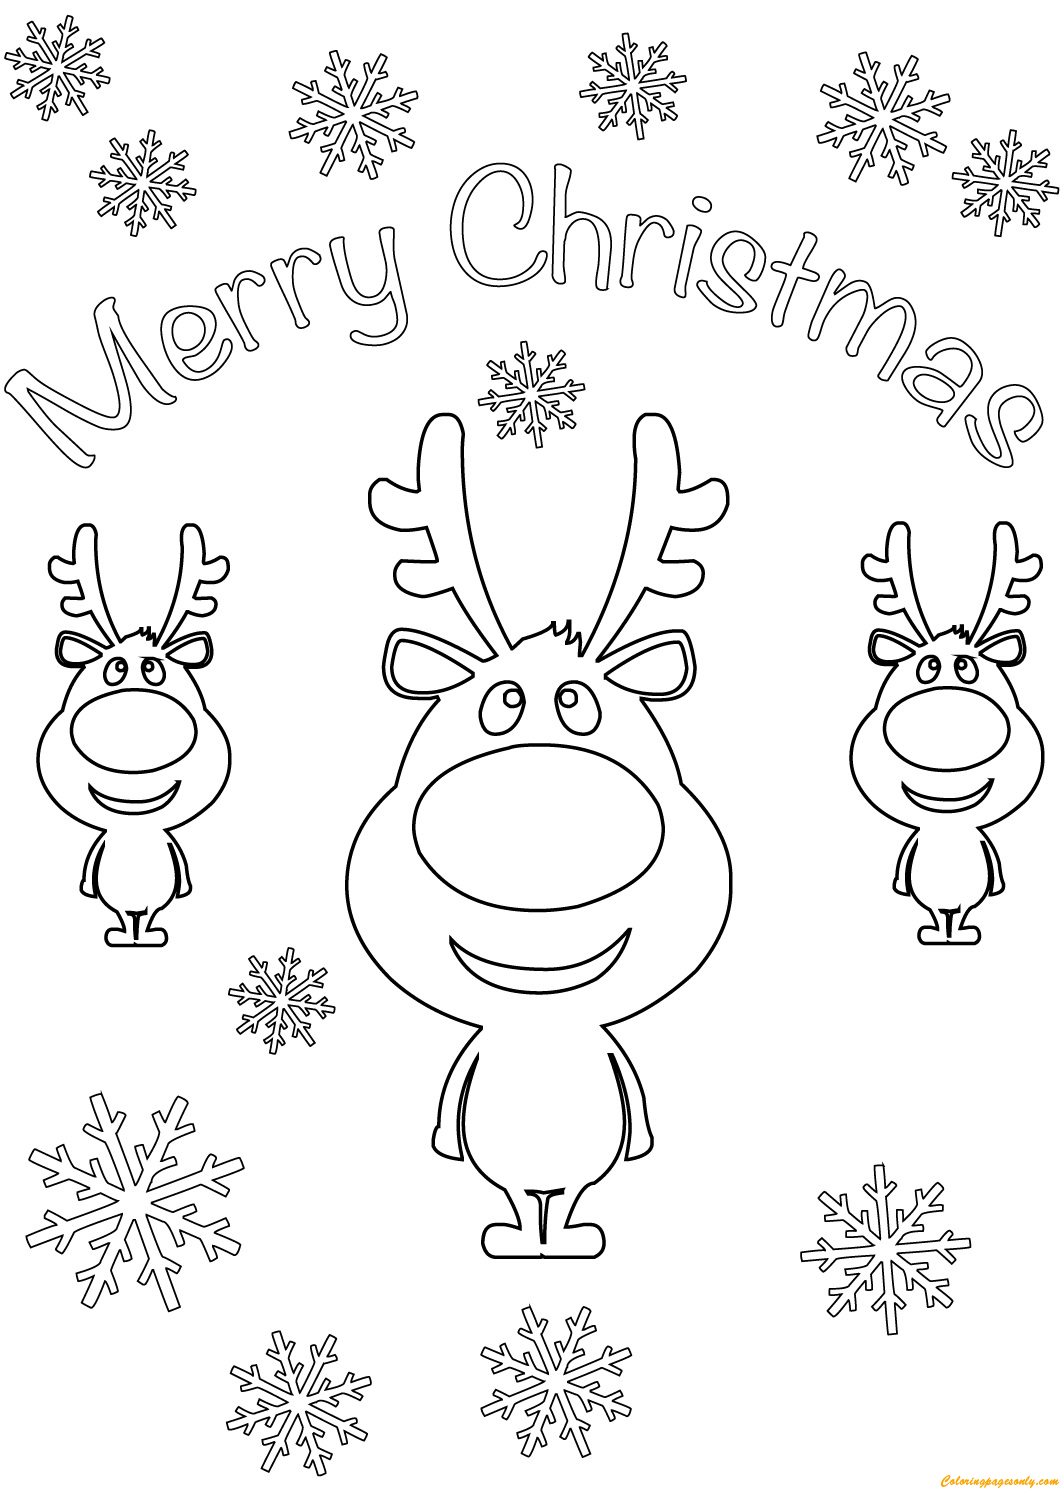 Reindeer Merry Christmas Cards Coloring Page